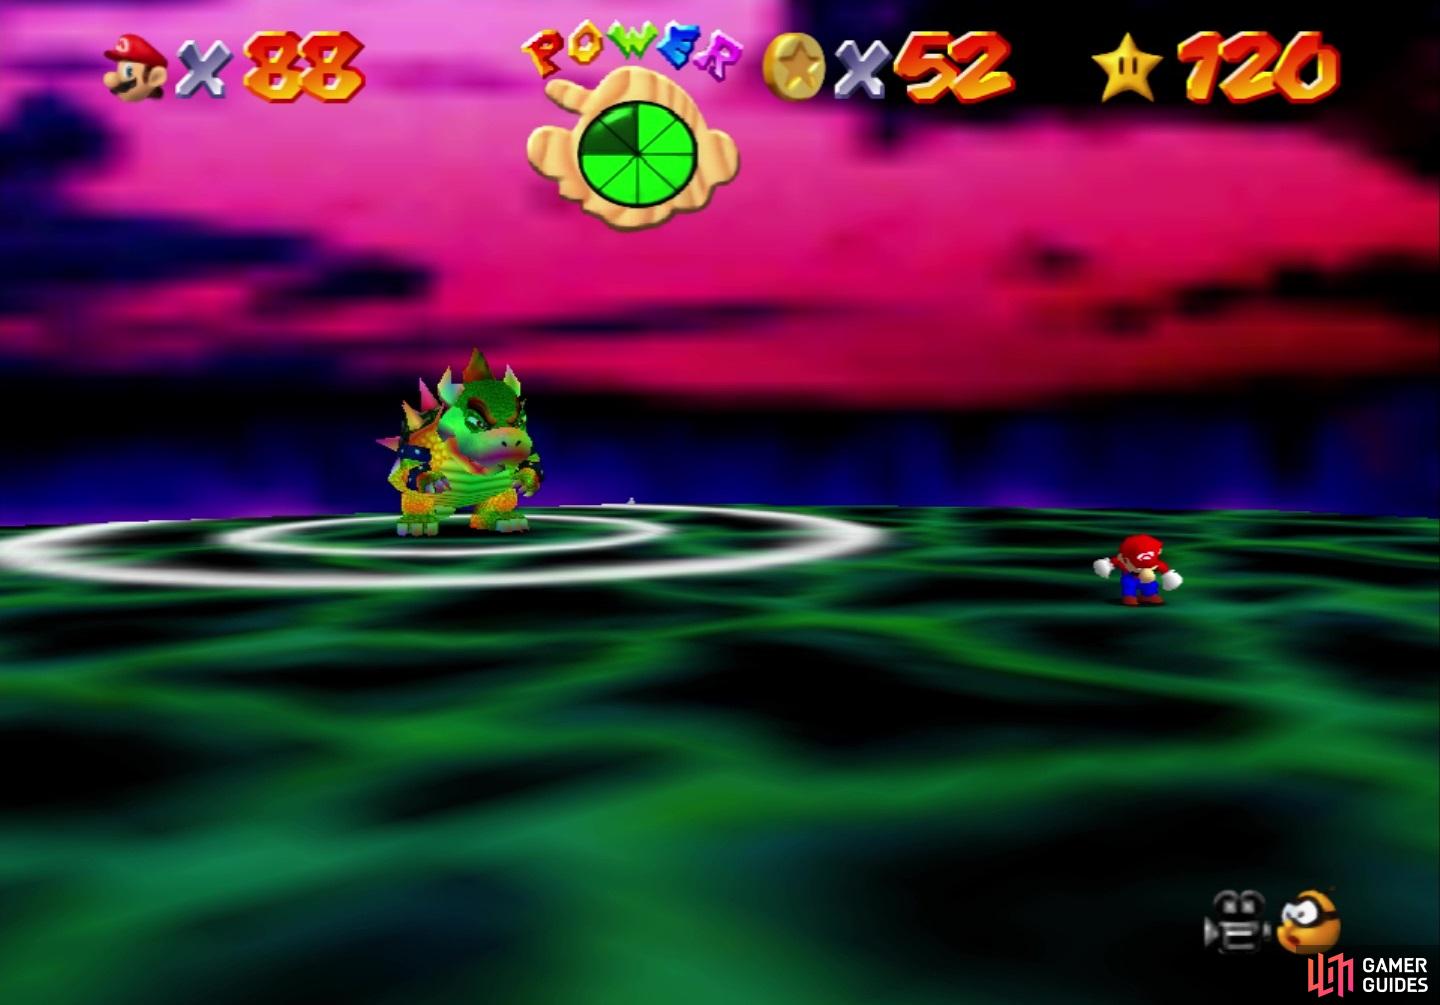 Bowser can jump and send out some shockwaves